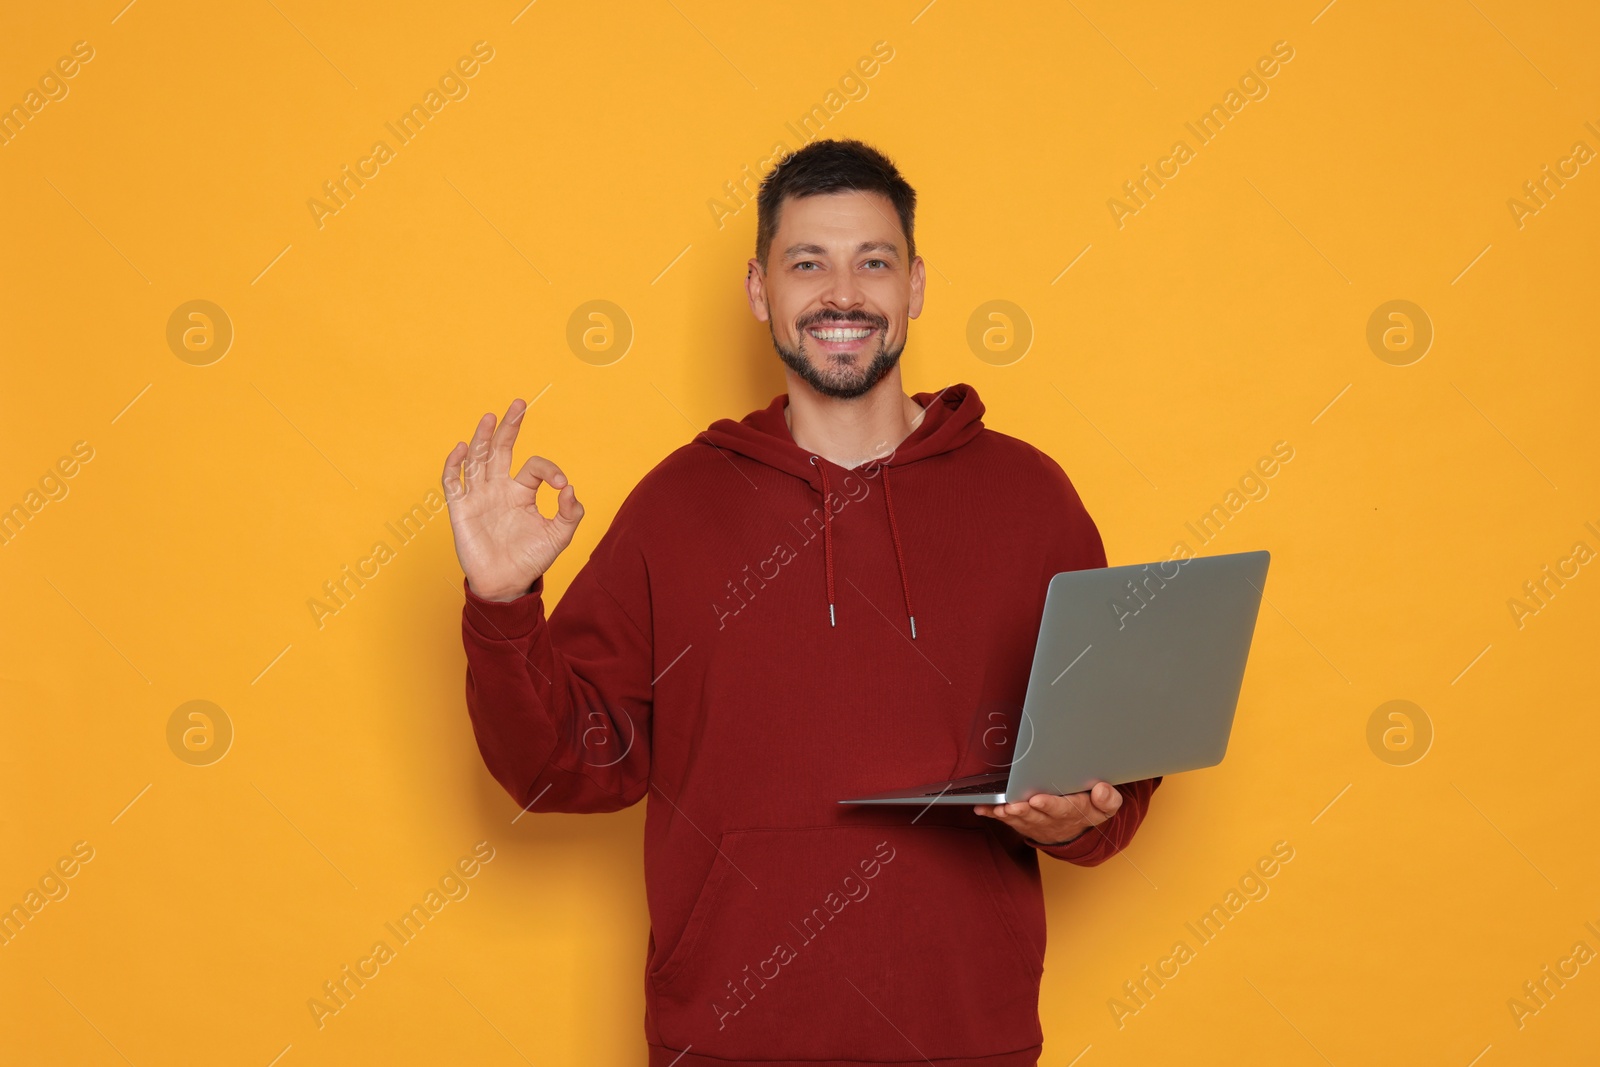 Photo of Smiling man with laptop showing okay gesture on orange background